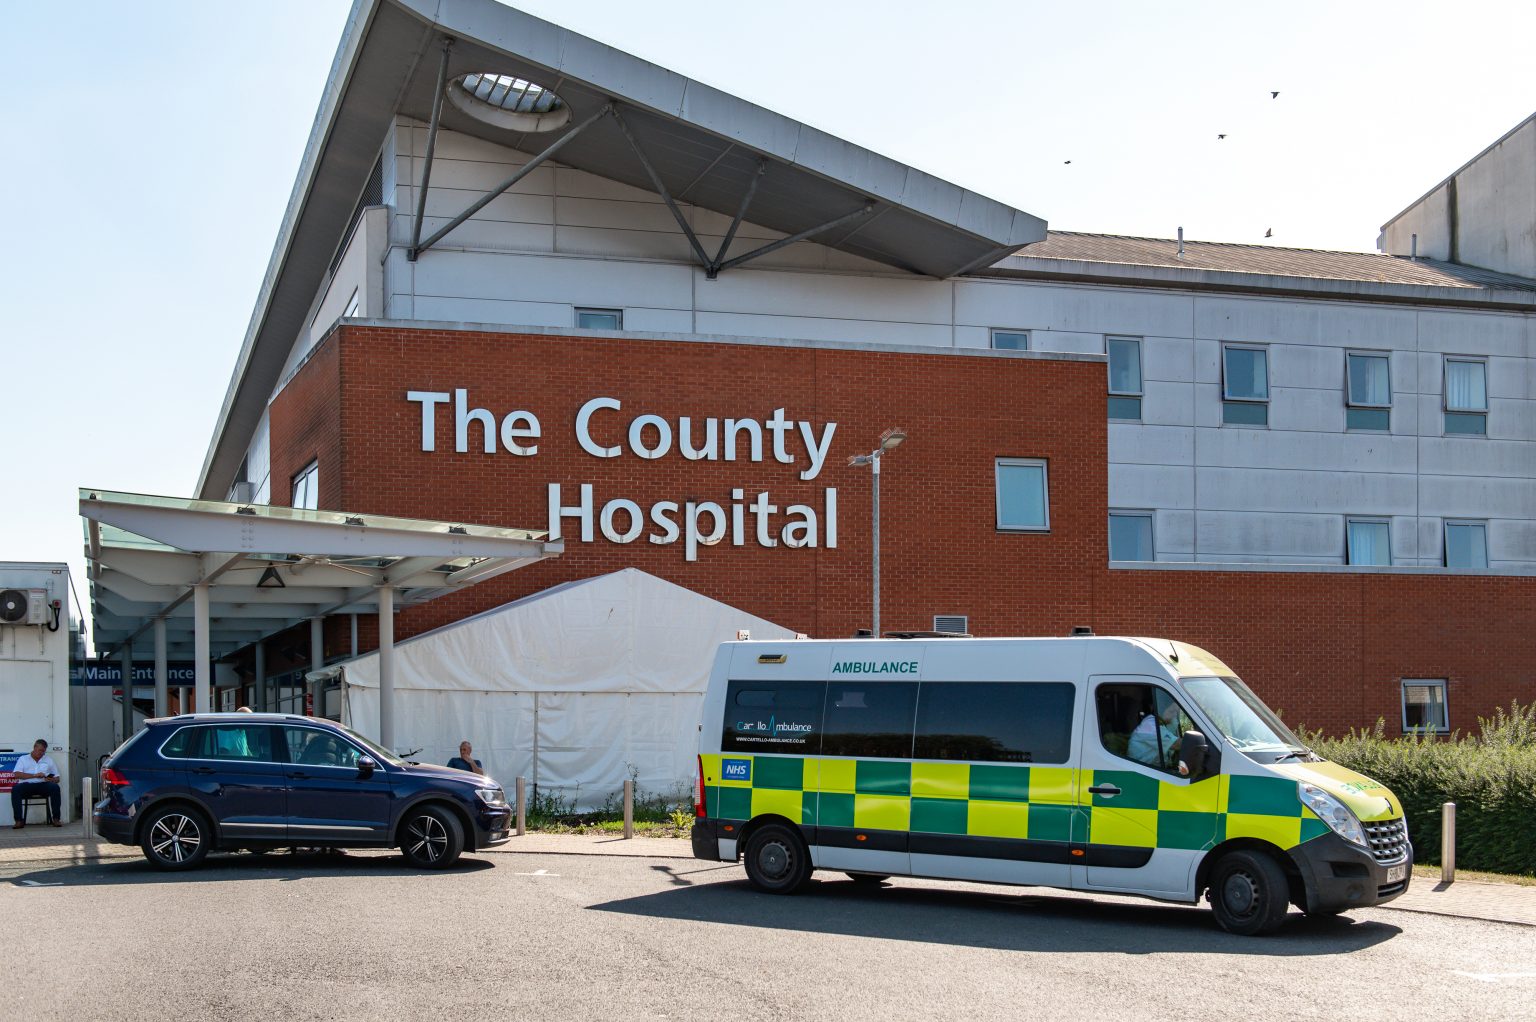 NEWS | Public invited to attend Wye Valley NHS Trust’s virtual Public Board Meeting from the comfort of their own homes